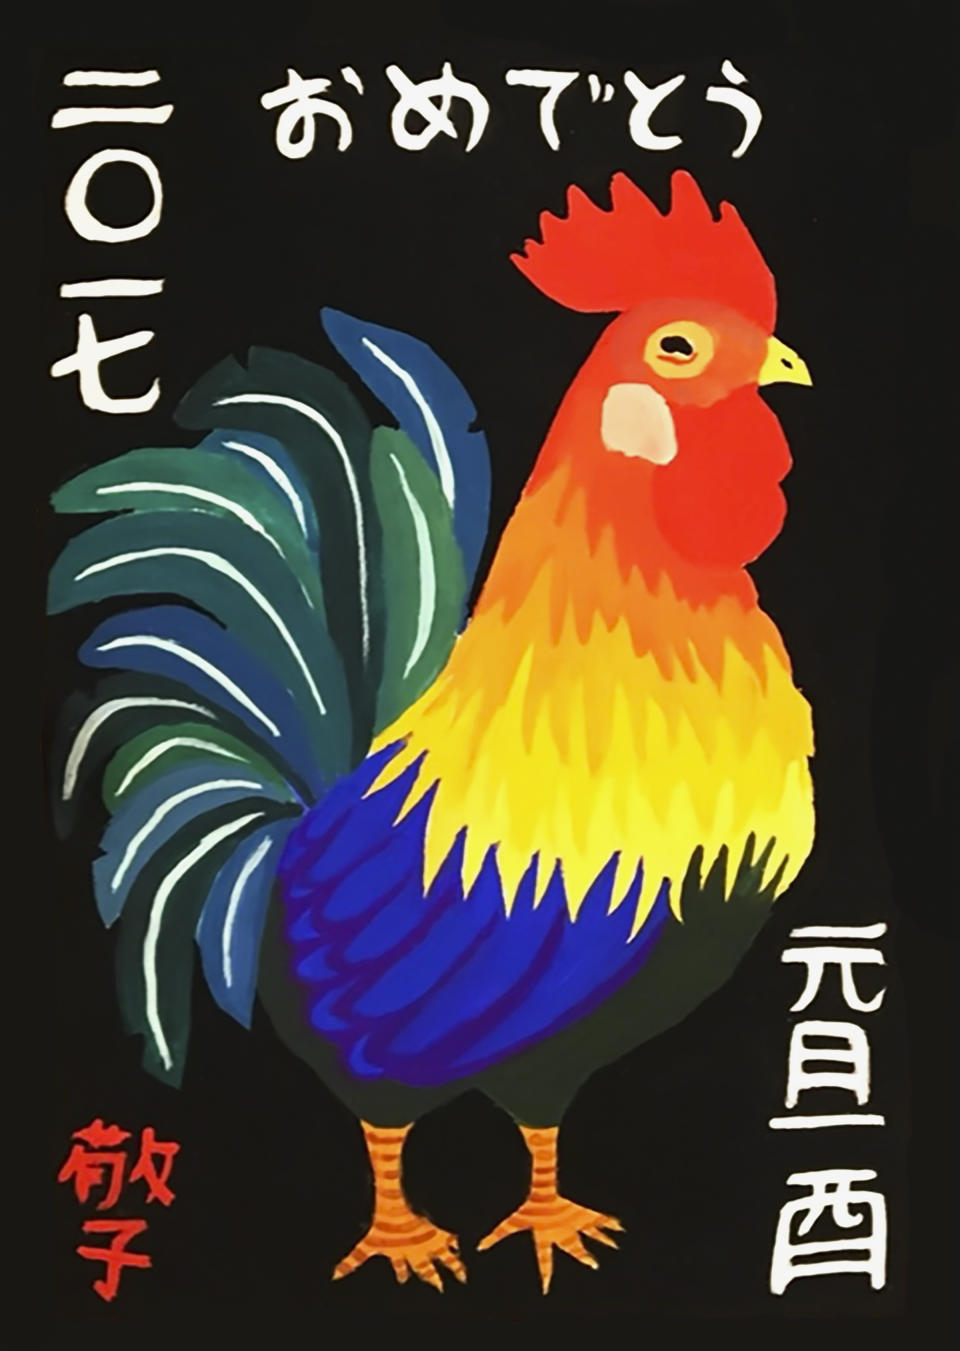 This image provided by Rose Keiko Higa shows a Japanese-style New Year's card. Written in Japanese, the messages on the card say: "Happy New Year, Year of the Rooster, 2017." The card is signed "Keiko" on the bottom left corner. At this time of year, Rose Keiko Higa is making holiday cards for family and friends. An art history major at Oberlin College, in Ohio, she uses cut and layered paper to craft Christmas cards, and paints traditional Japanese New Year's cards on watercolor paper. (Rose Keiko Higa via AP)